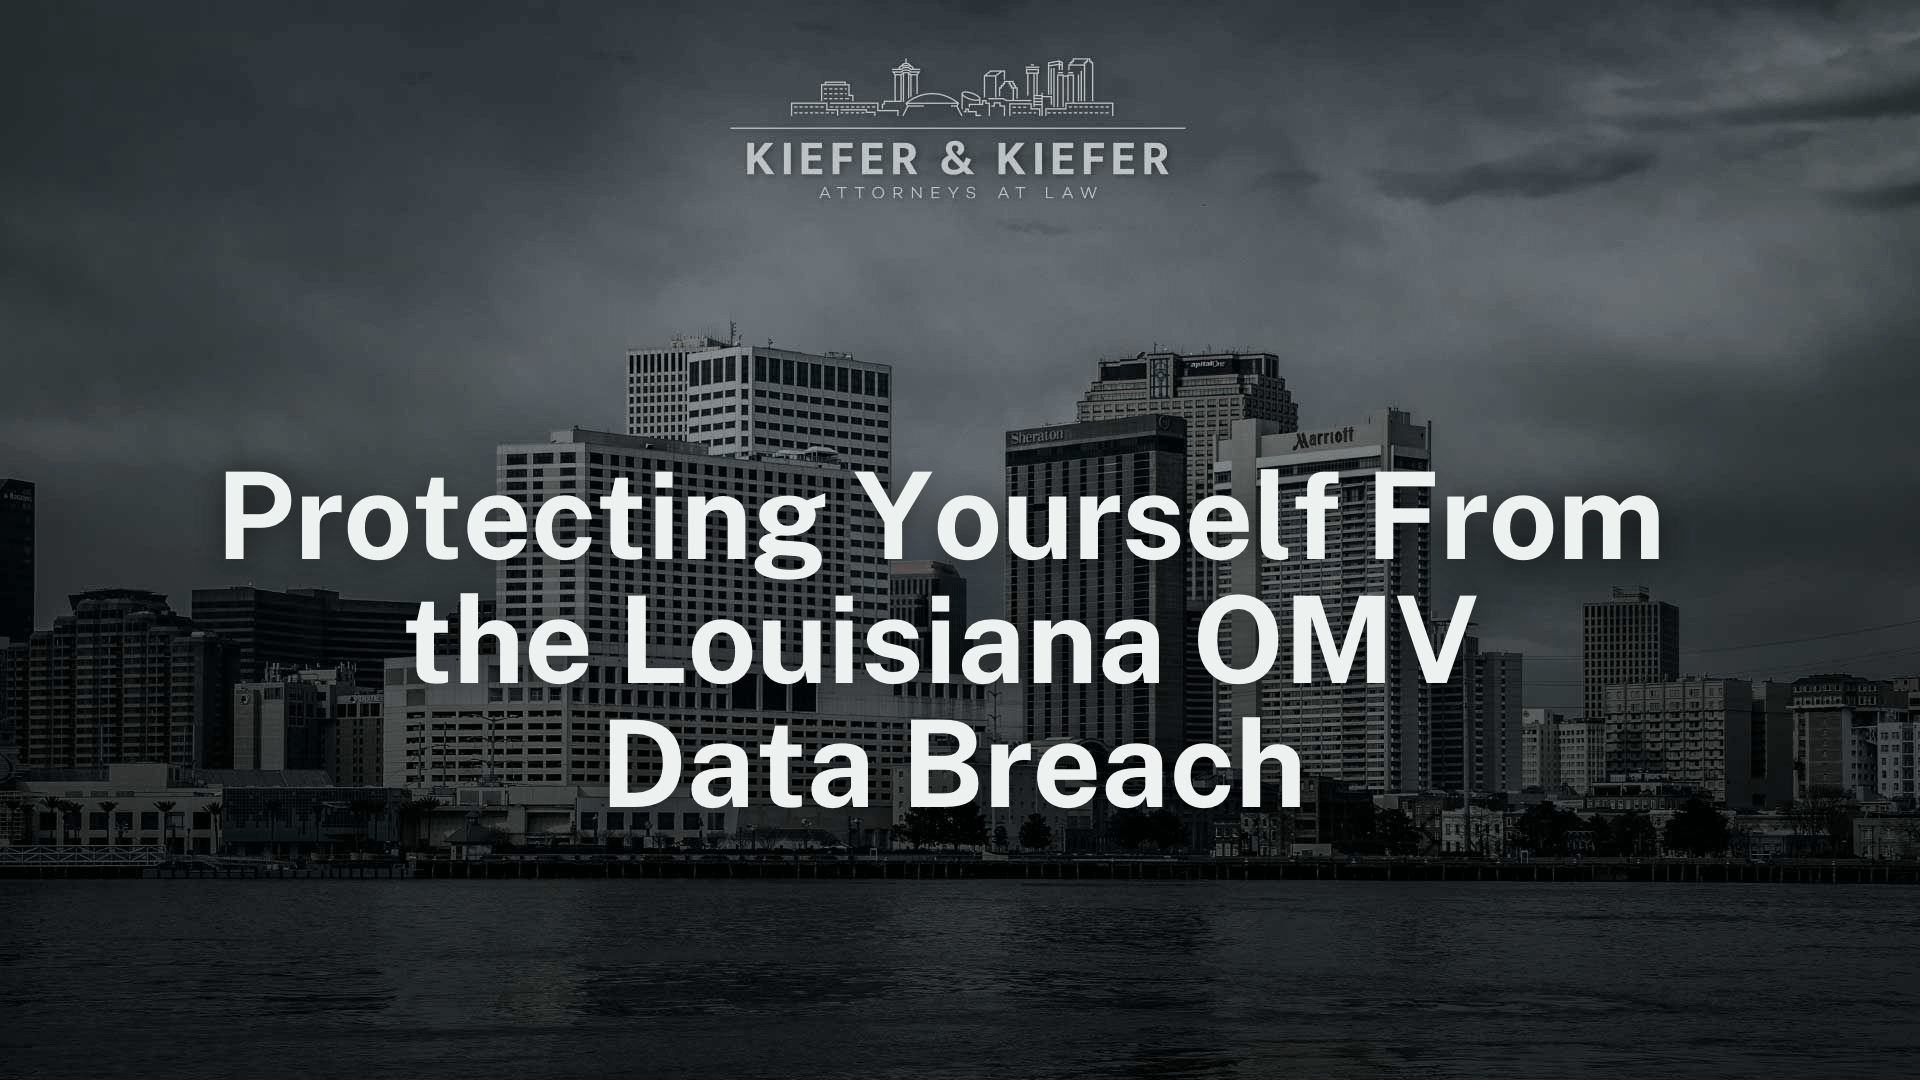 Protecting Yourself From the louisiana Office of Motor Vehicle (OMV) Data Breach - Kiefer & Kiefer New Orleans Personal Injury Attorneys